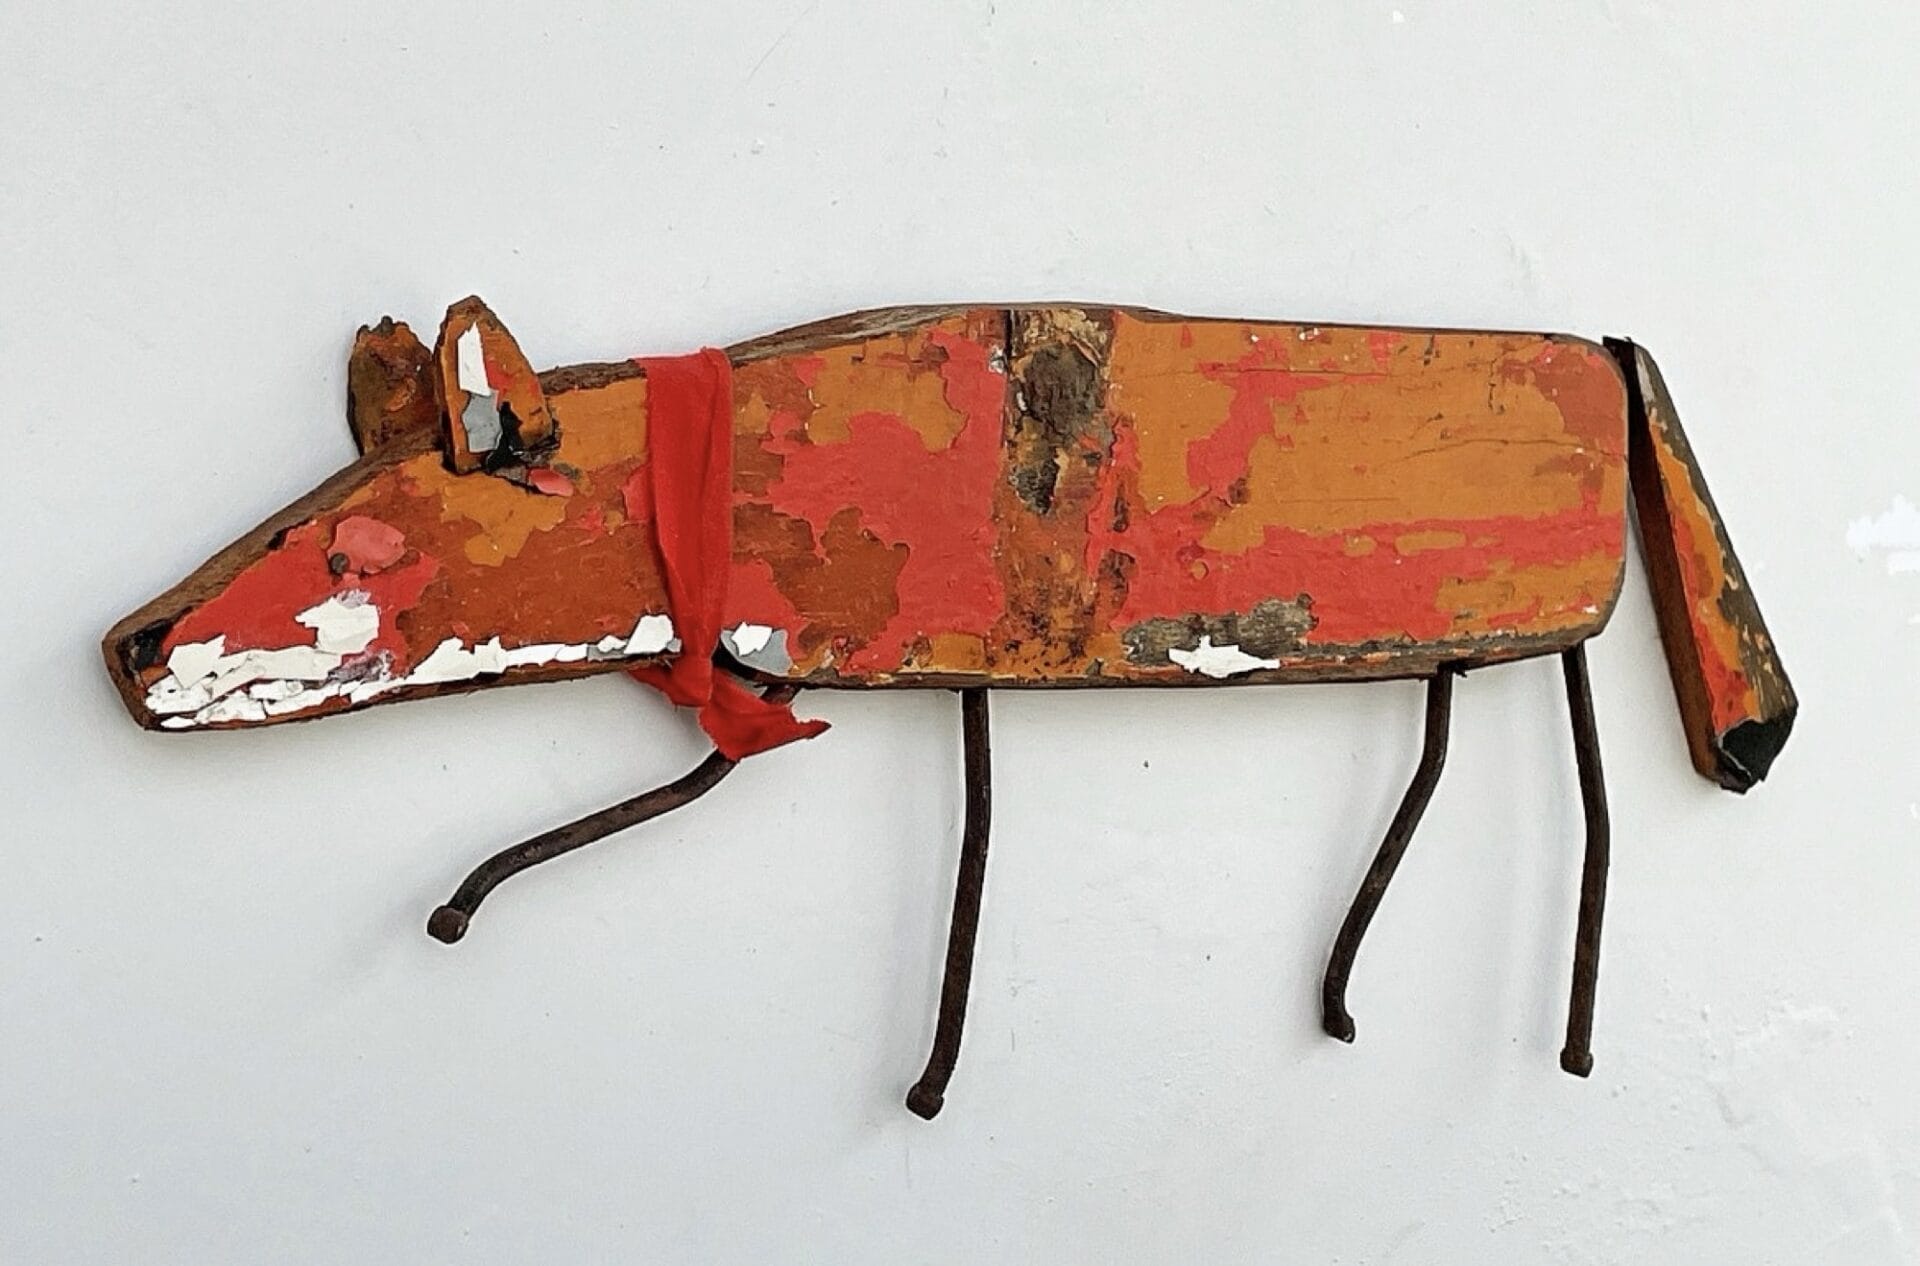 a fox sculpture made from repurposed, painted wood with rusty nails for legs